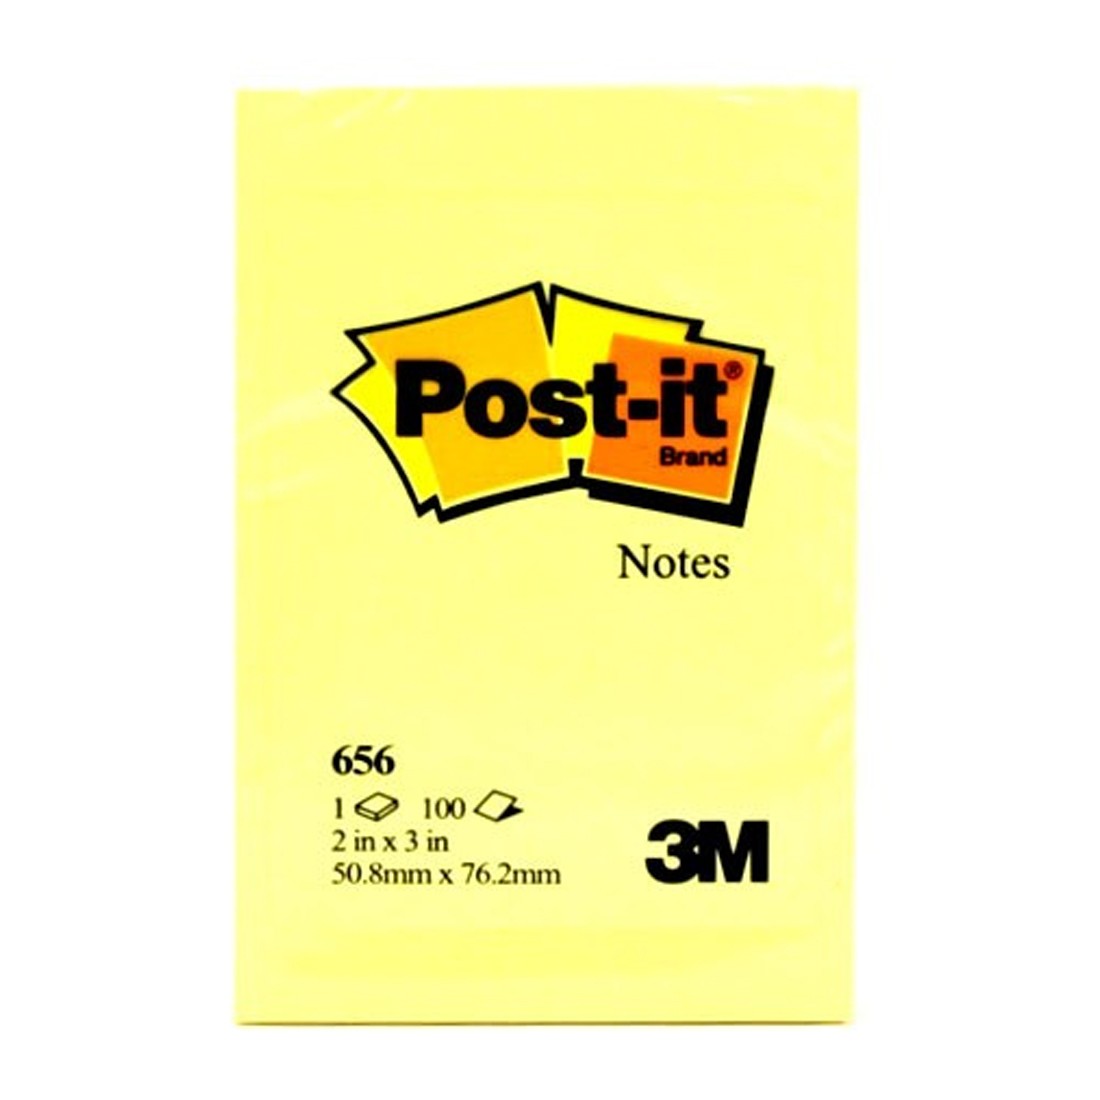 3M 656 Post-it Notes 2 x 3in - Yellow (pkt/12pcs)